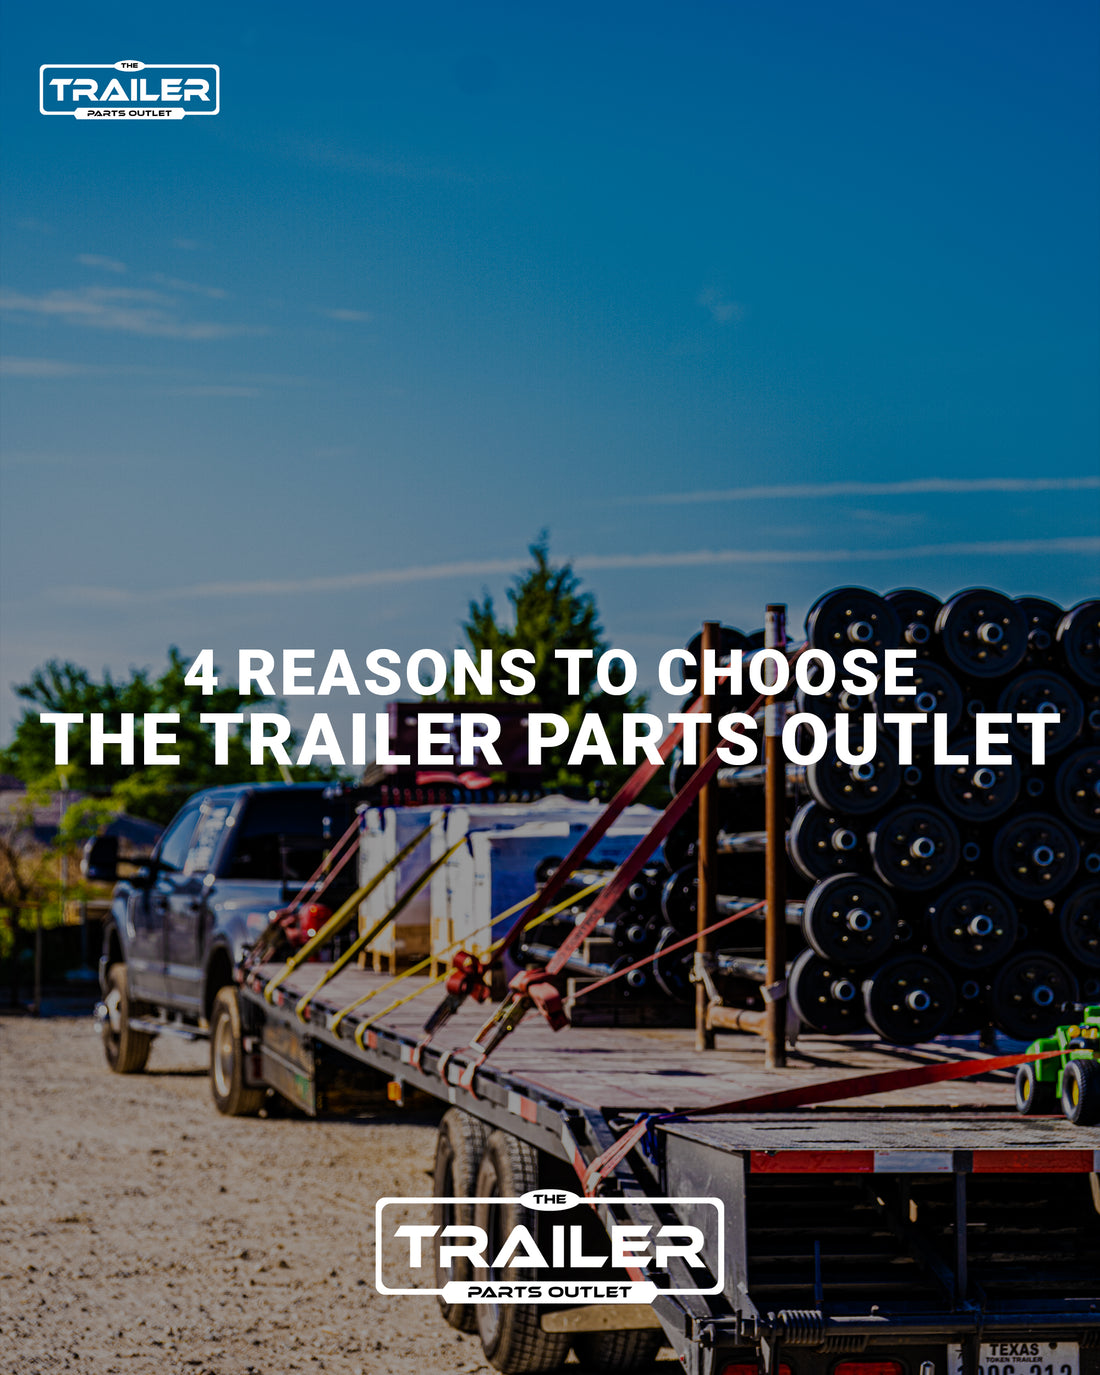 4 Reasons to Choose the Trailer Parts Outlet